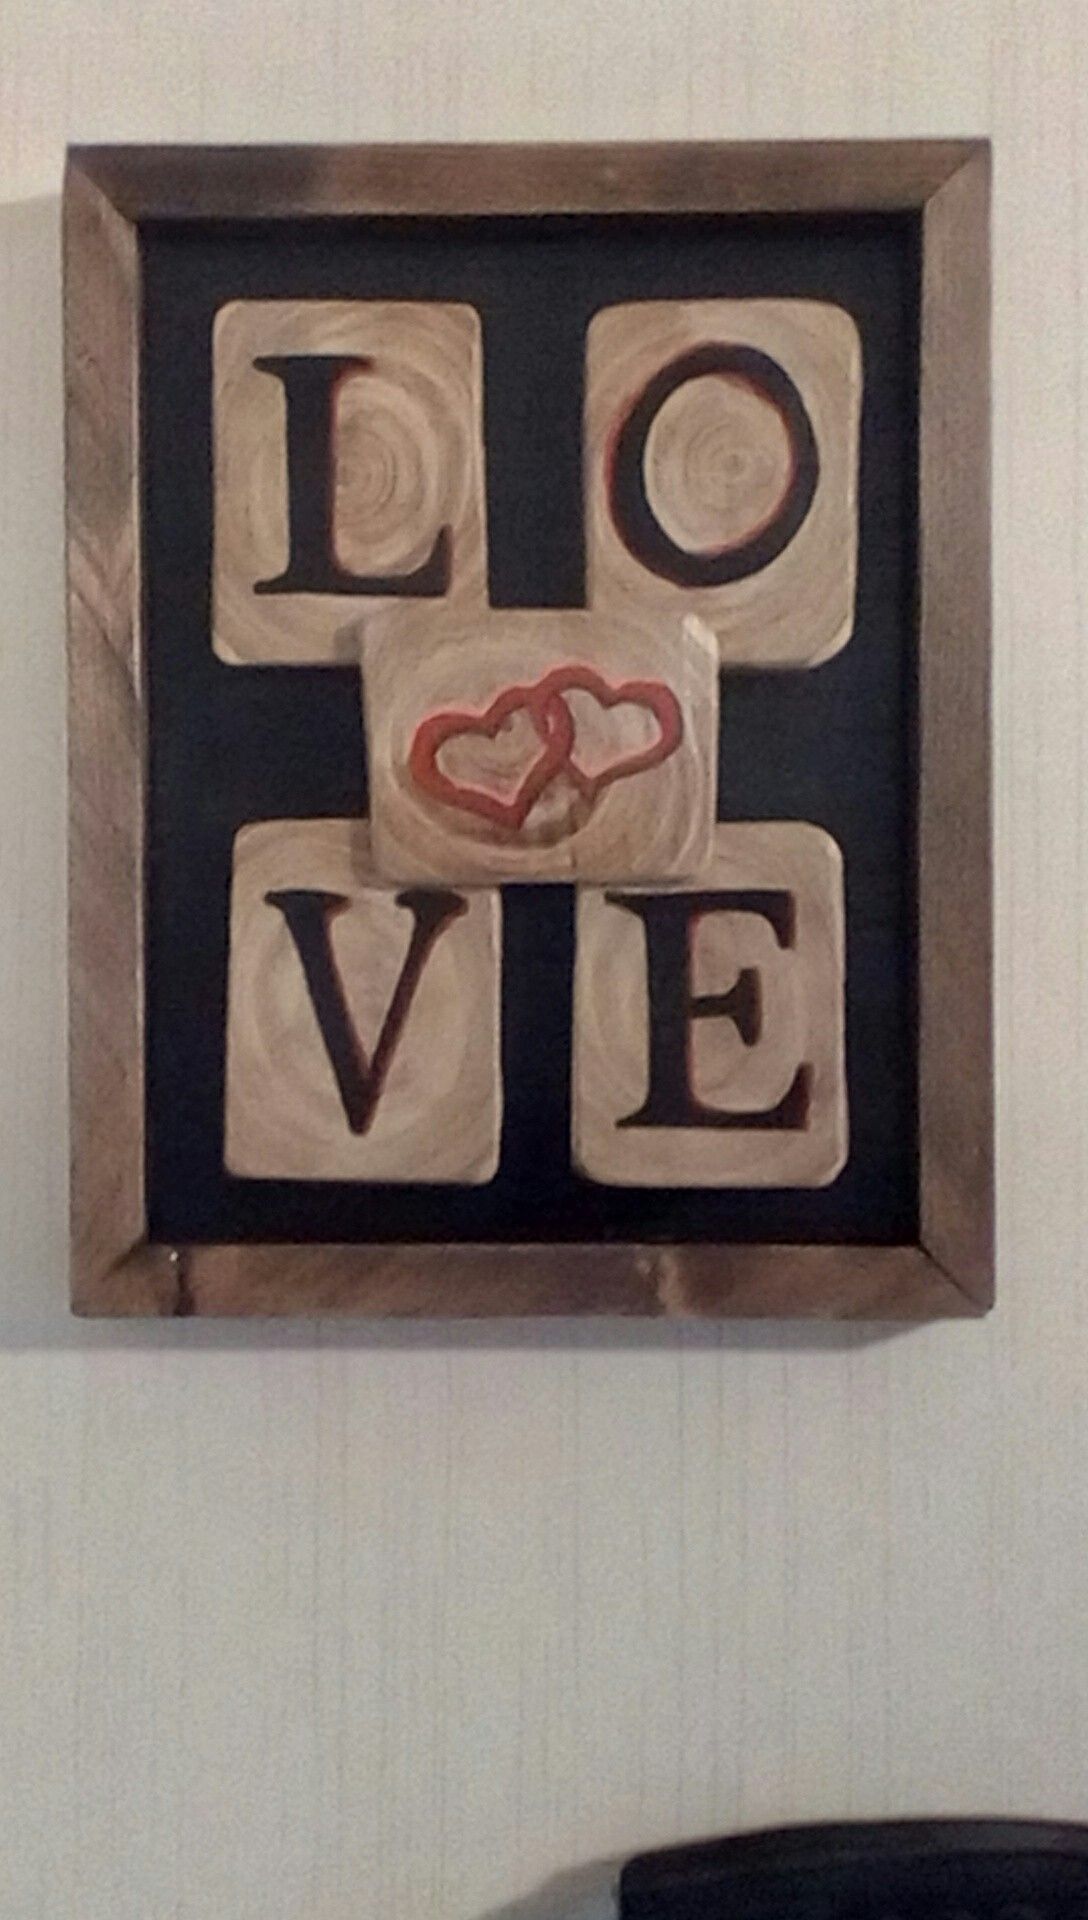 3 Dimensional Love Wall Art | Love Wall Art, Love Wall, Wall Art With Regard To 3 Dimensional Wall Art (View 10 of 15)